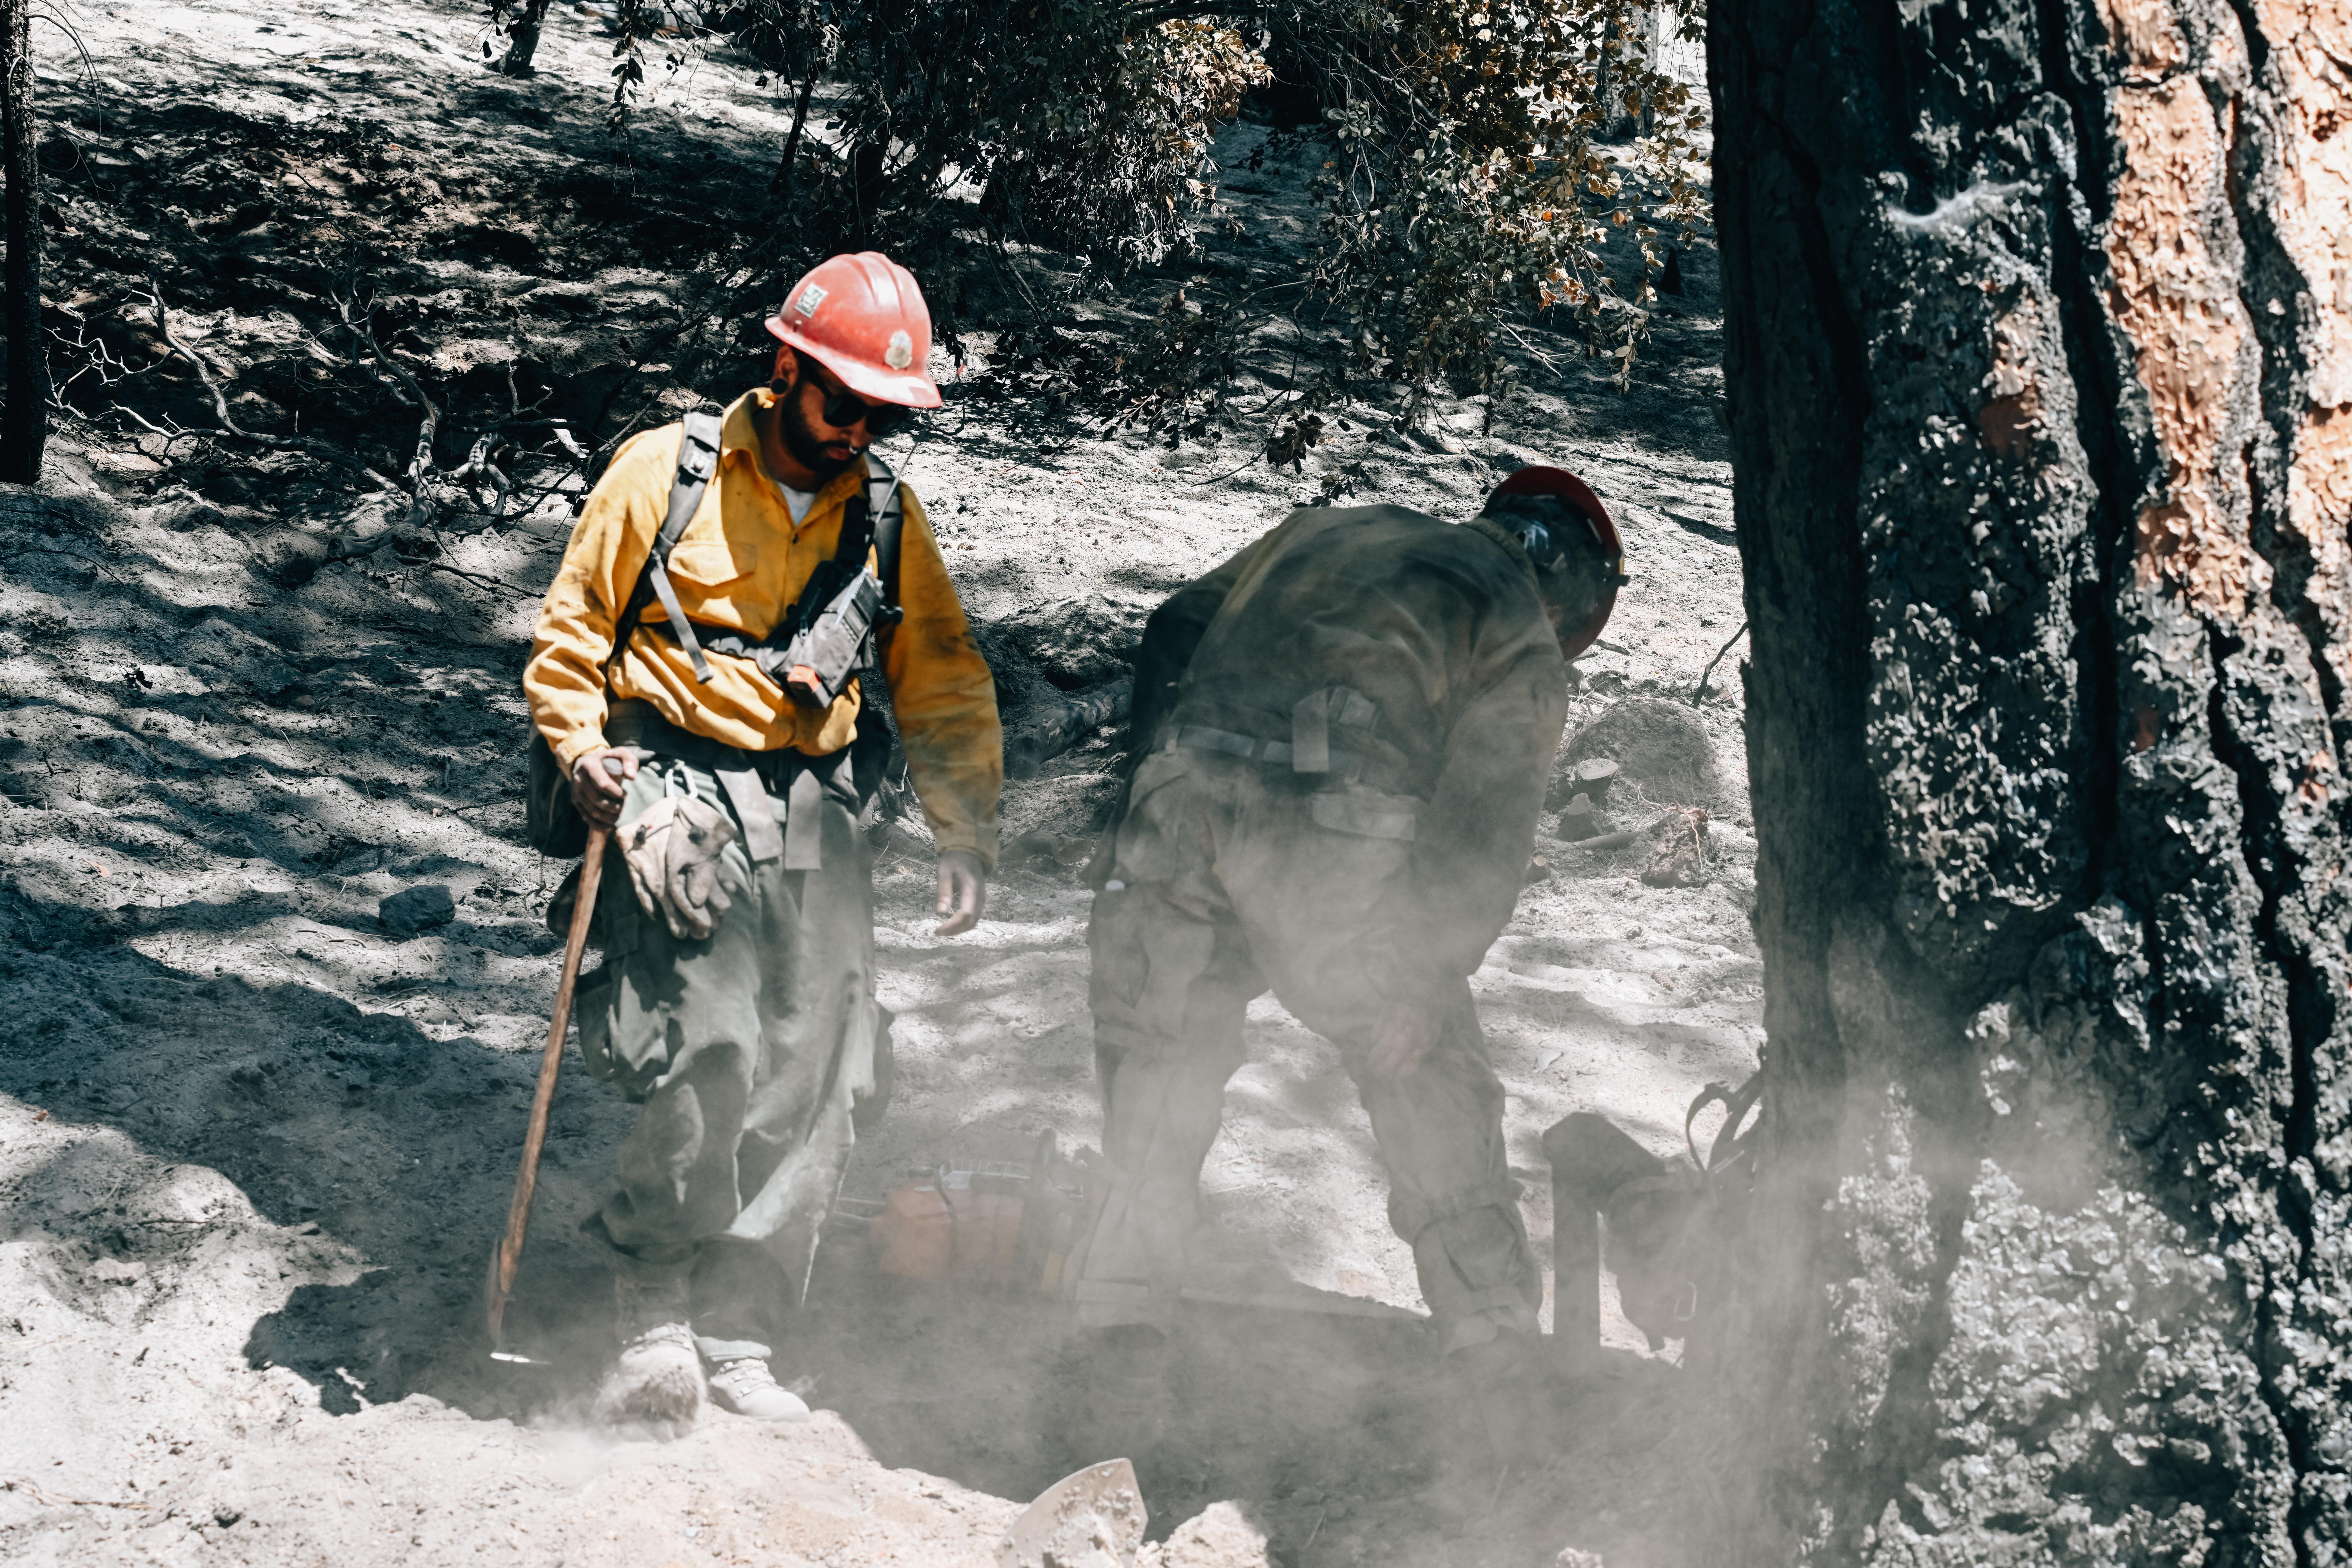 Crews with Bella Wildfire and Forestry work along Wawona Road, July 24, 2022, in Yosemite National Park performing suppression repair operations due to the Washburn Fire. Photo by Benjamin Cossel, USFS